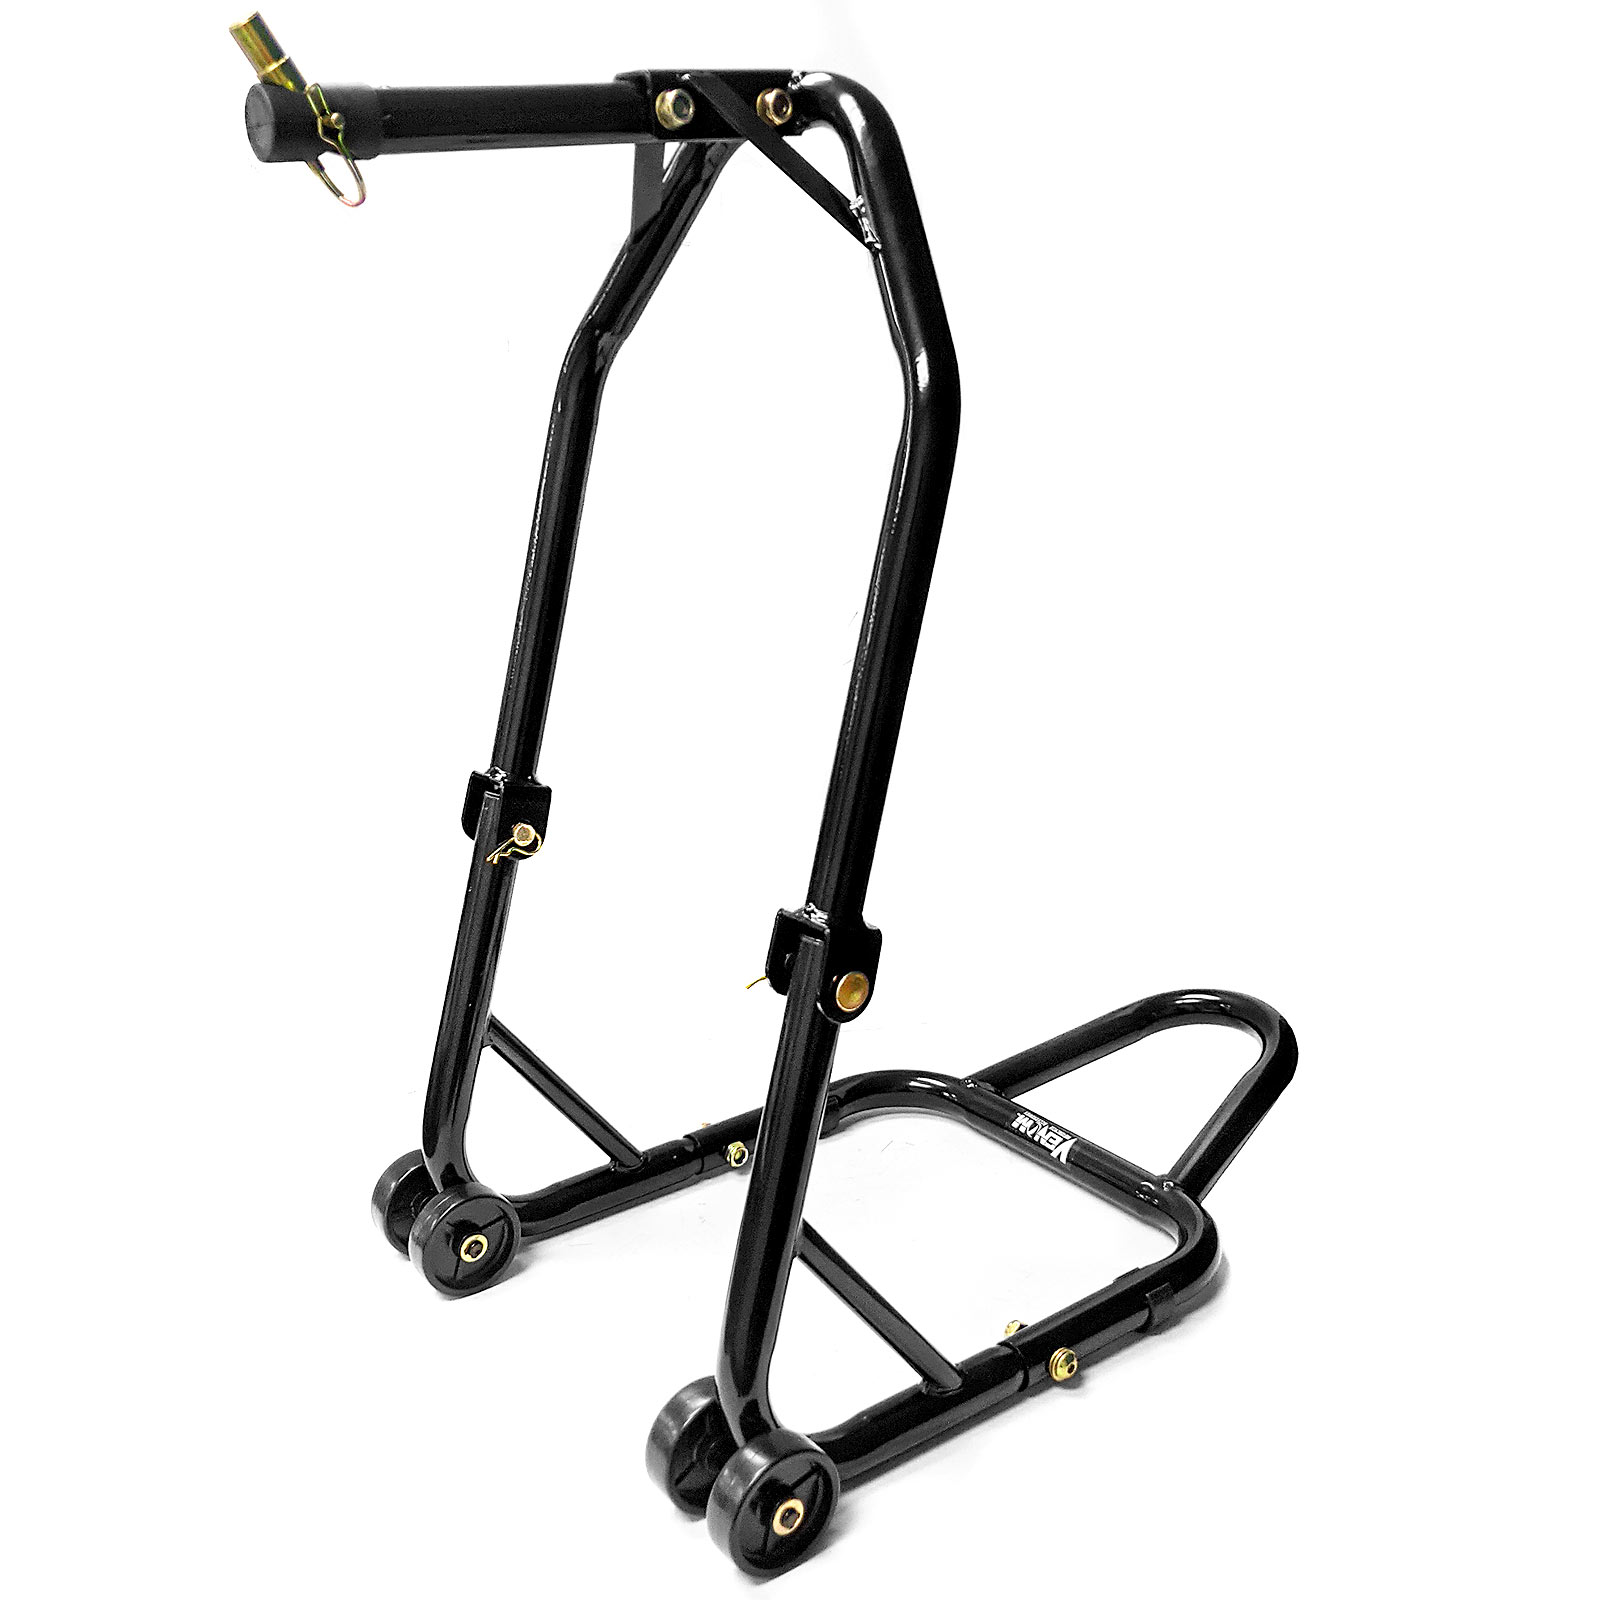 Venom Motorcycle Triple Tree Headlift Wheel Lift Stand Compatible with Triumph Speed Triple (2012+)